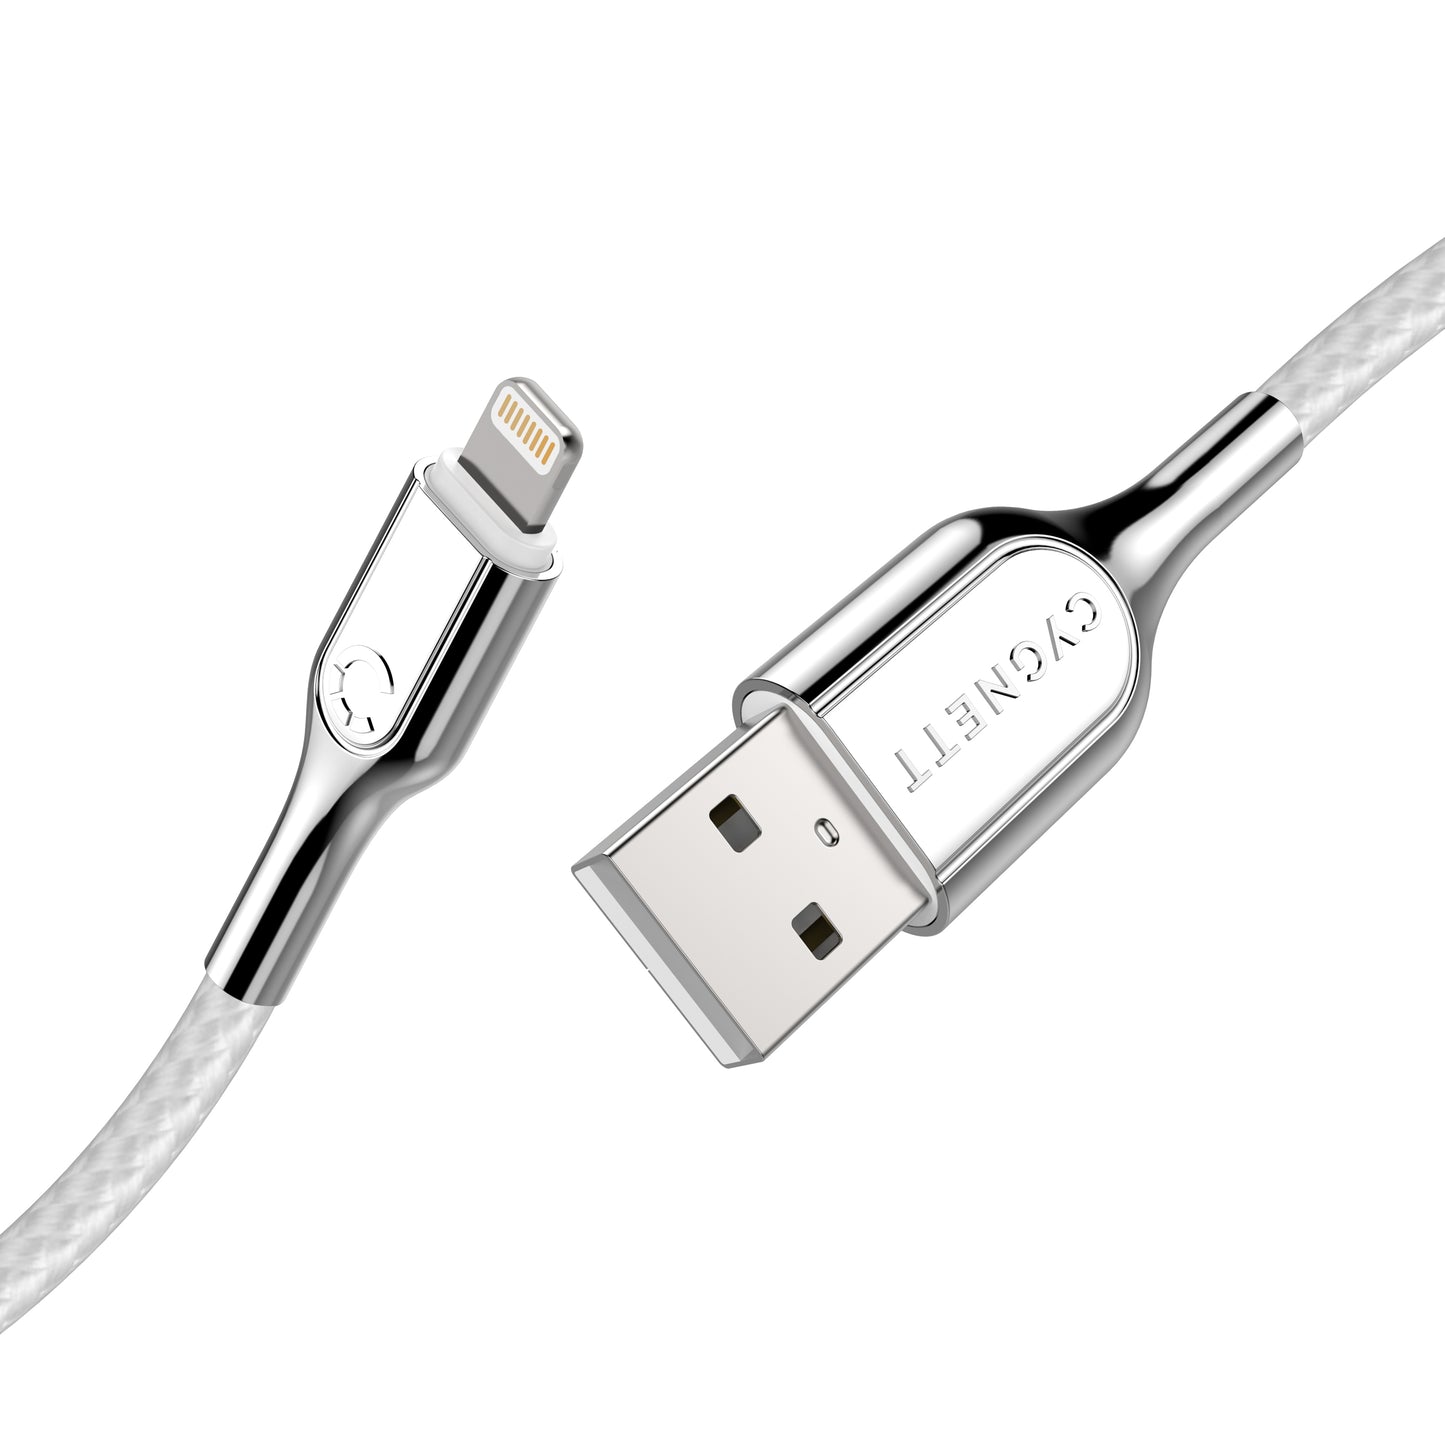 Cygnett Armoured Lightning to USB-A Cable 1M (White)